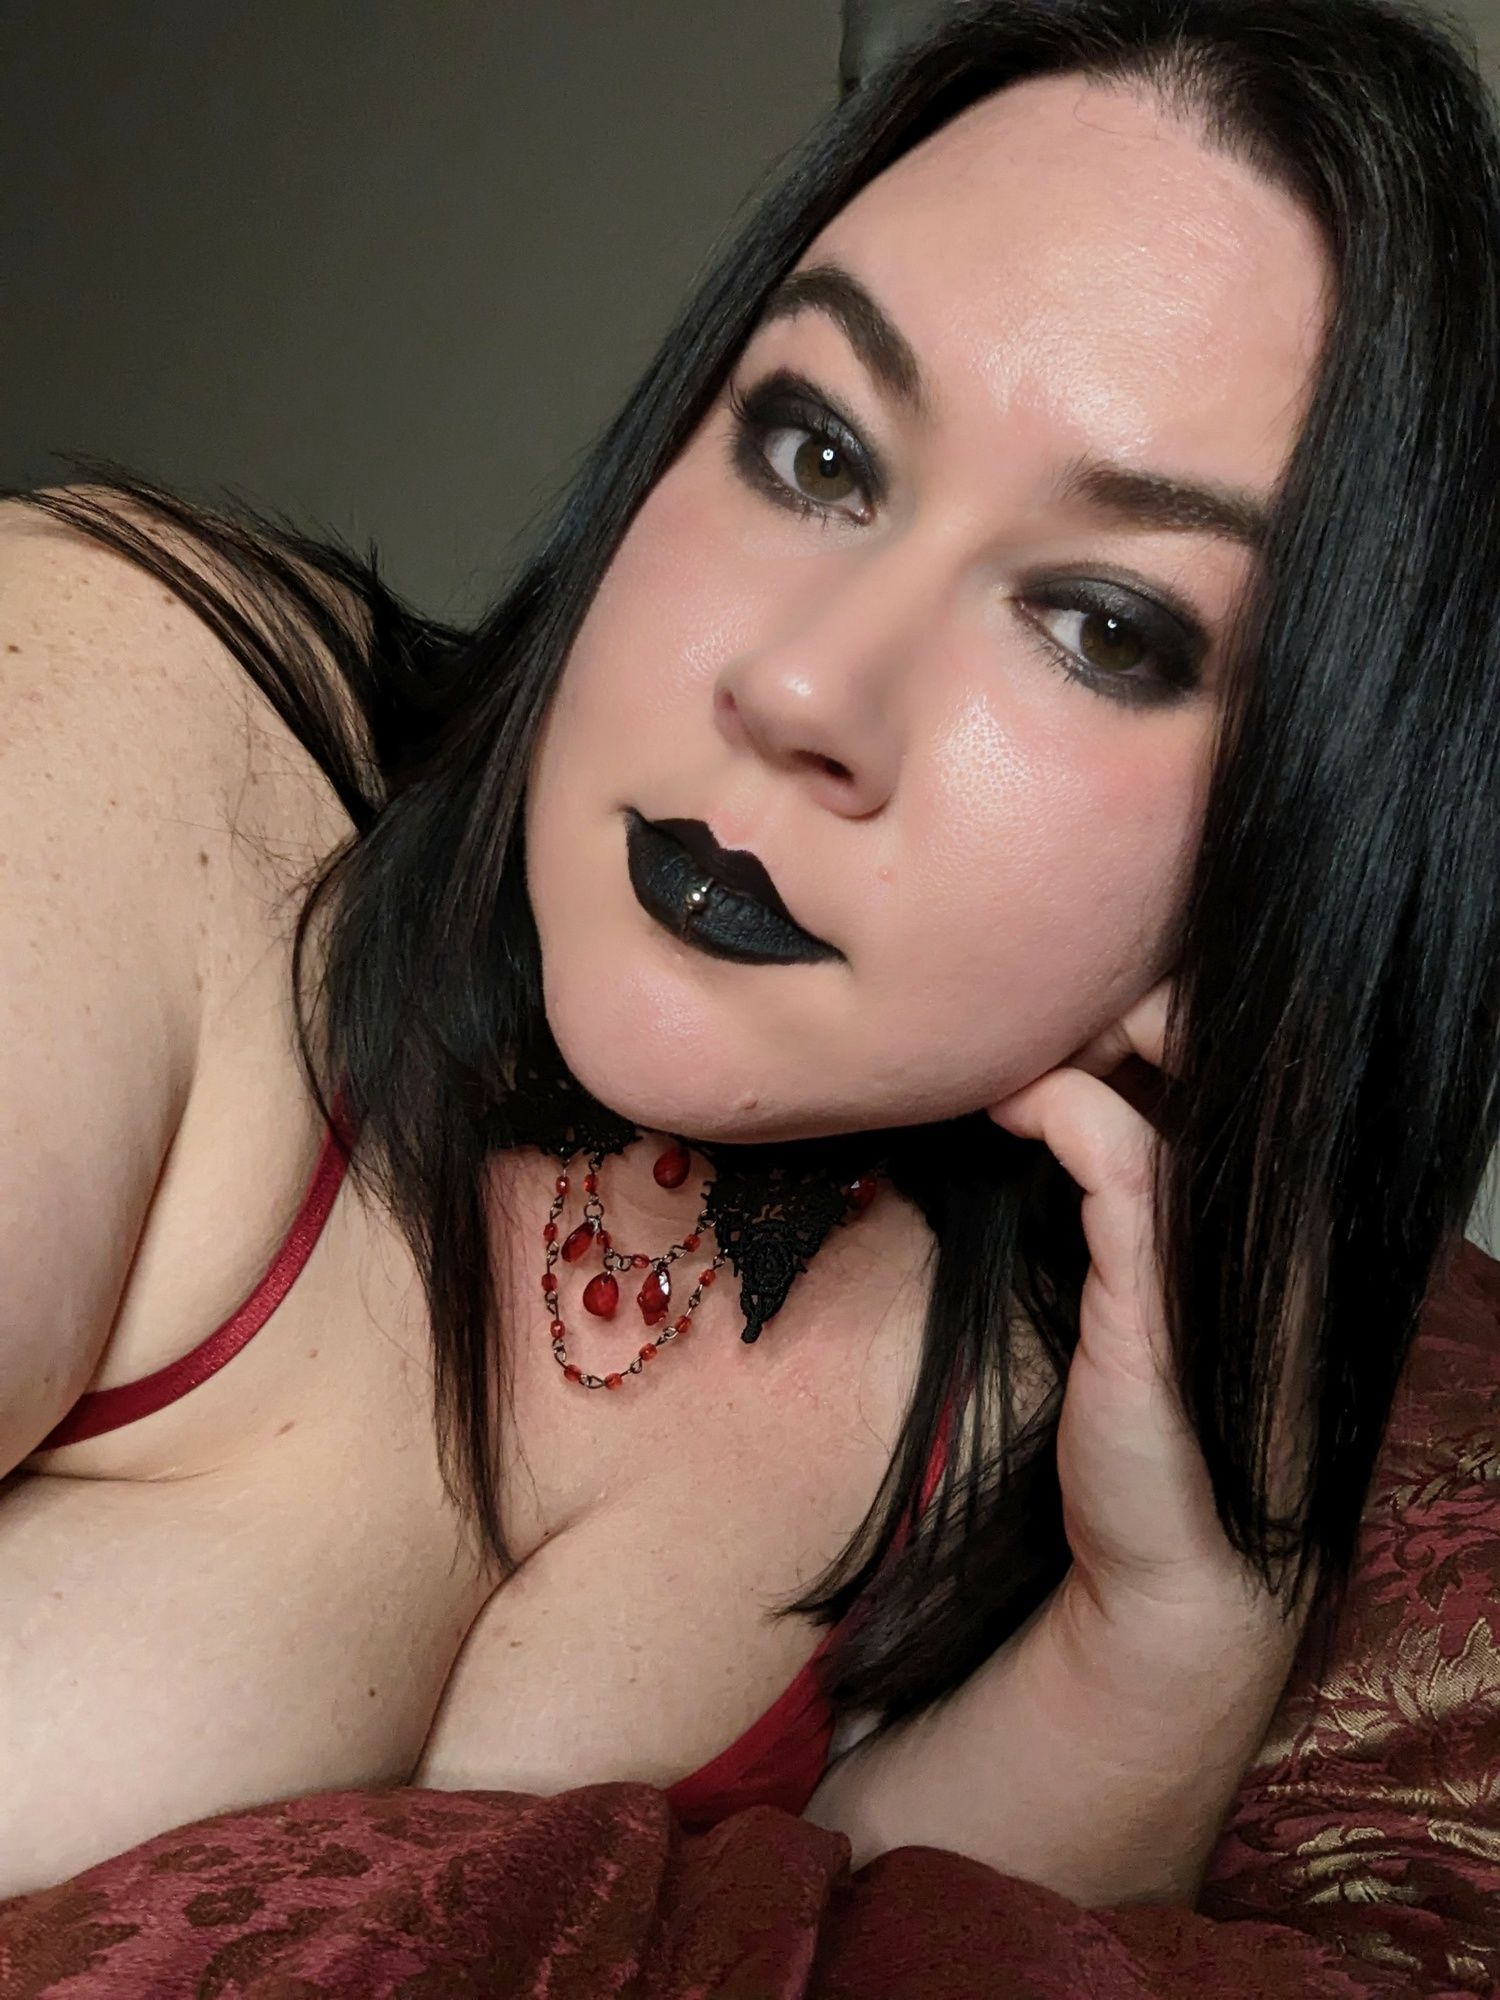 Gothic chick big tits and ass #7